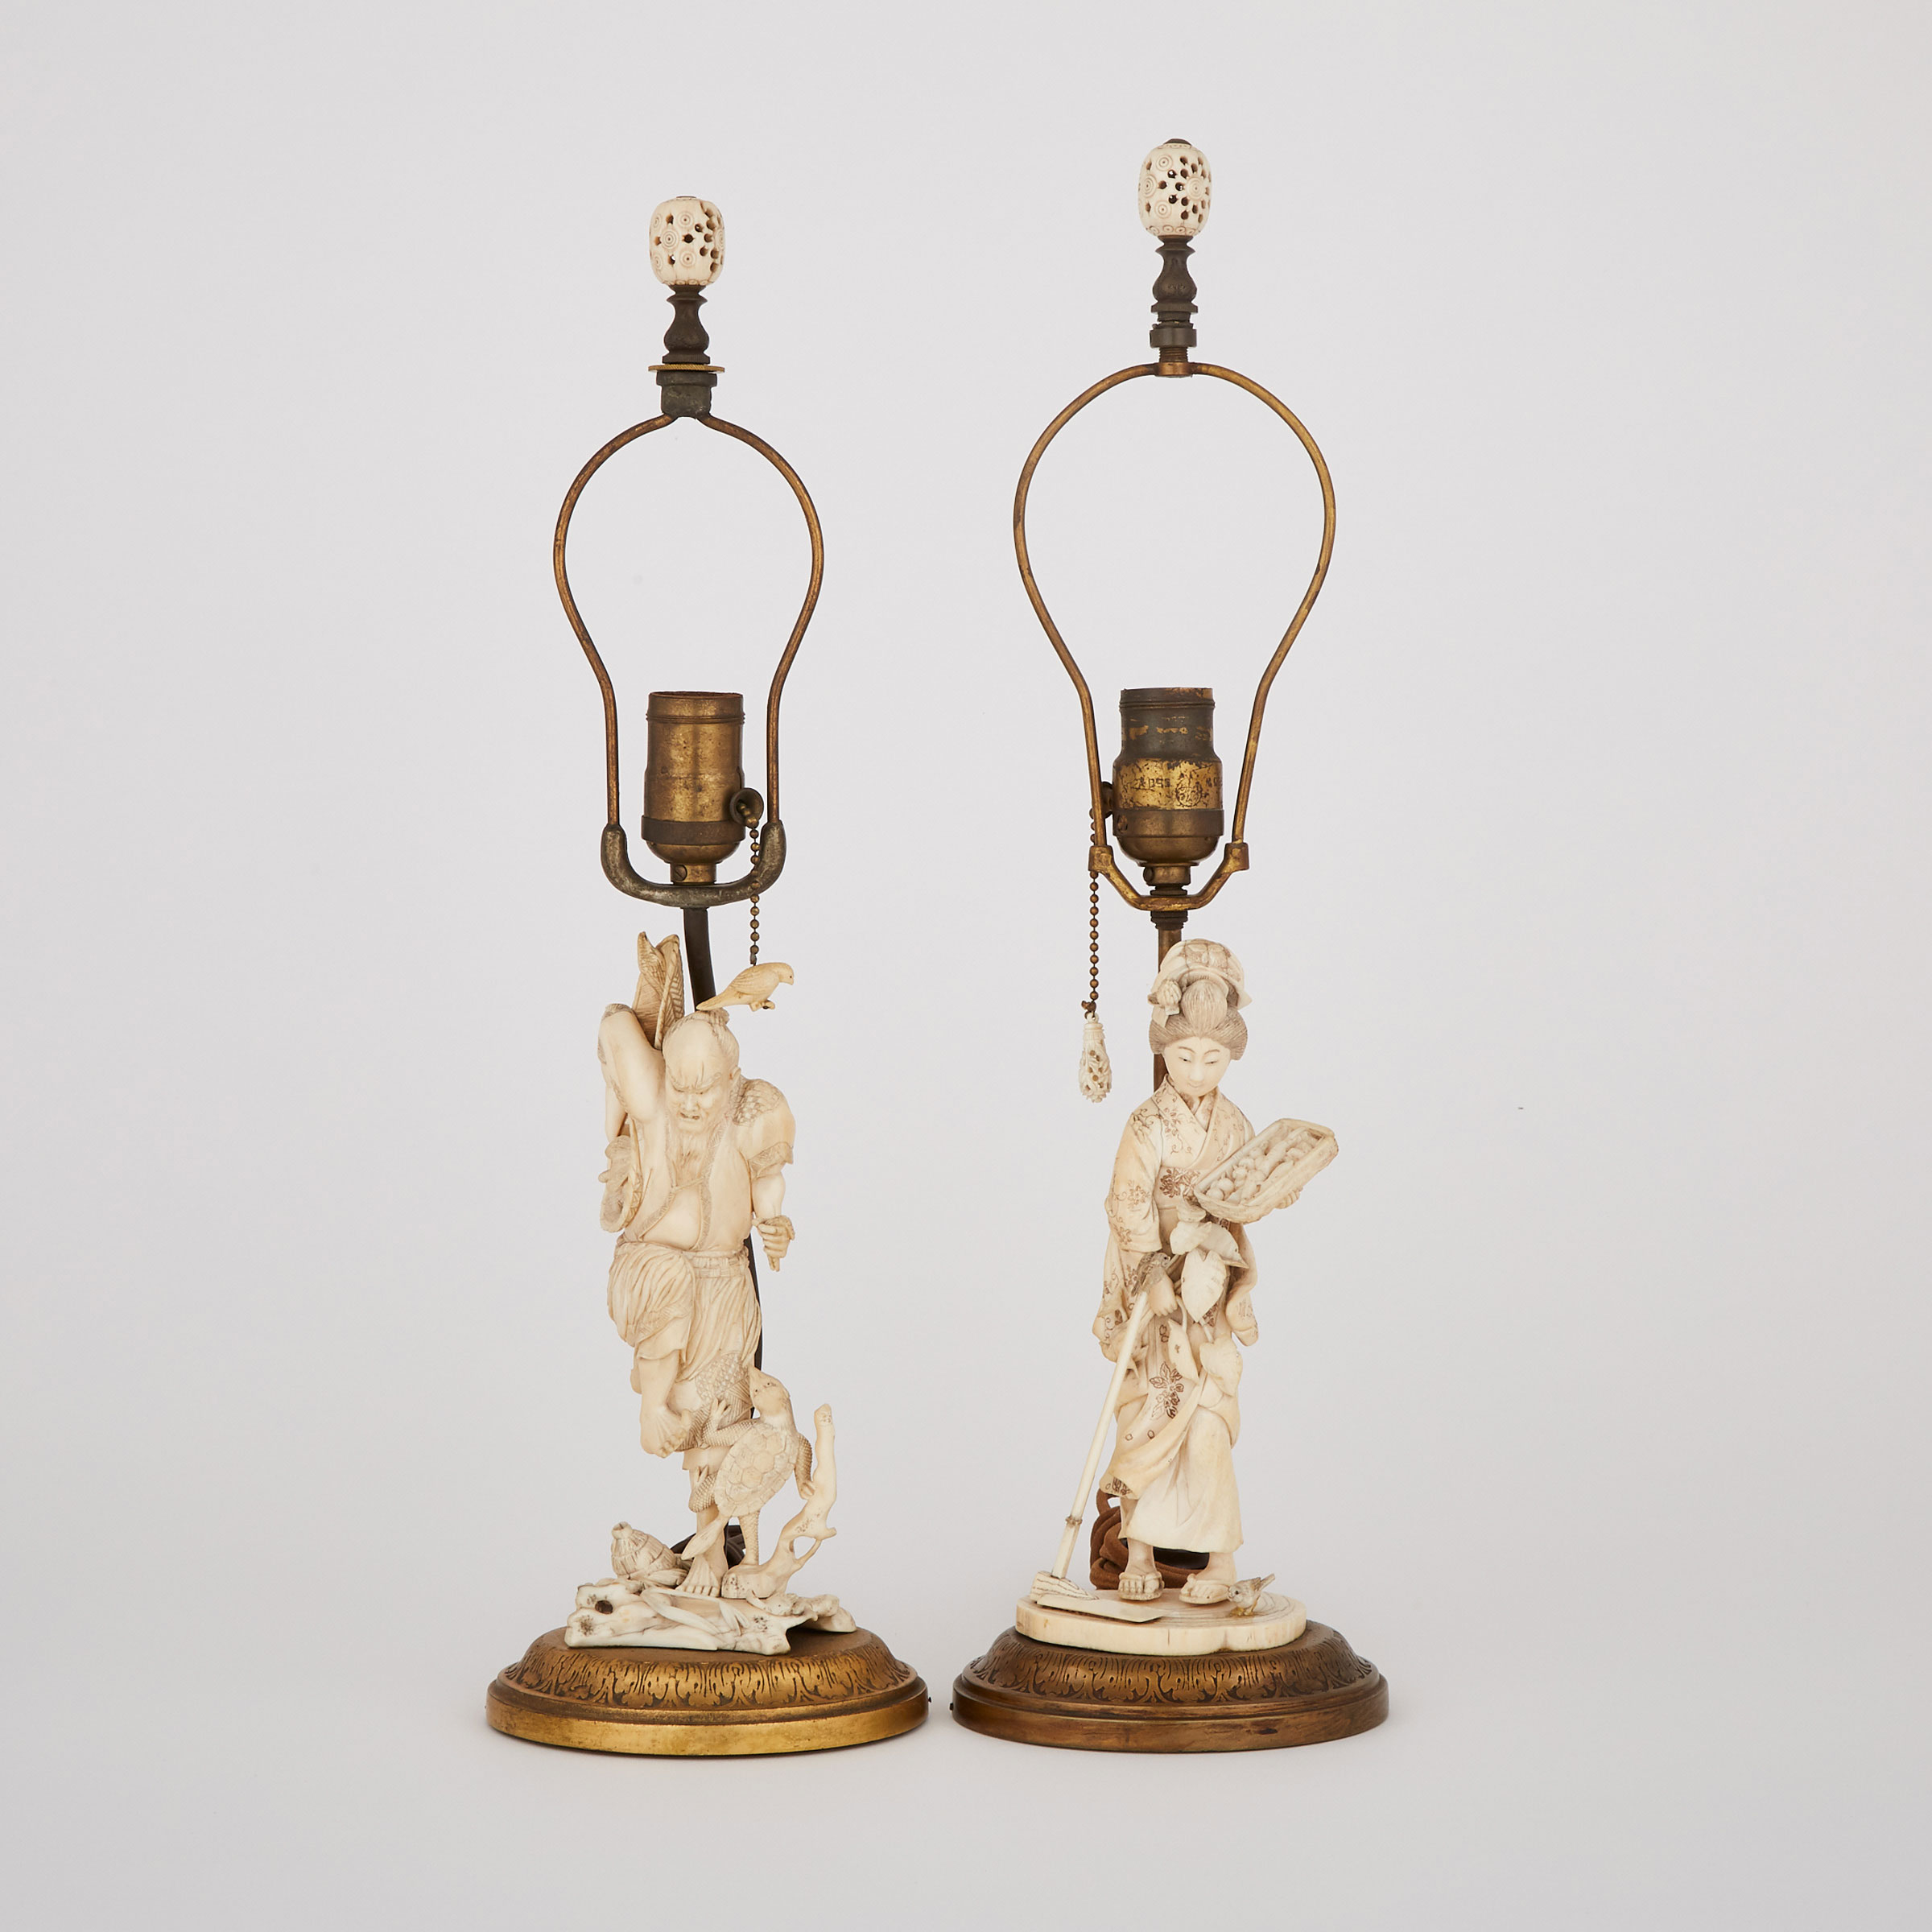 Two Ivory Okimono Mounted As Lamps, Early 20th Century